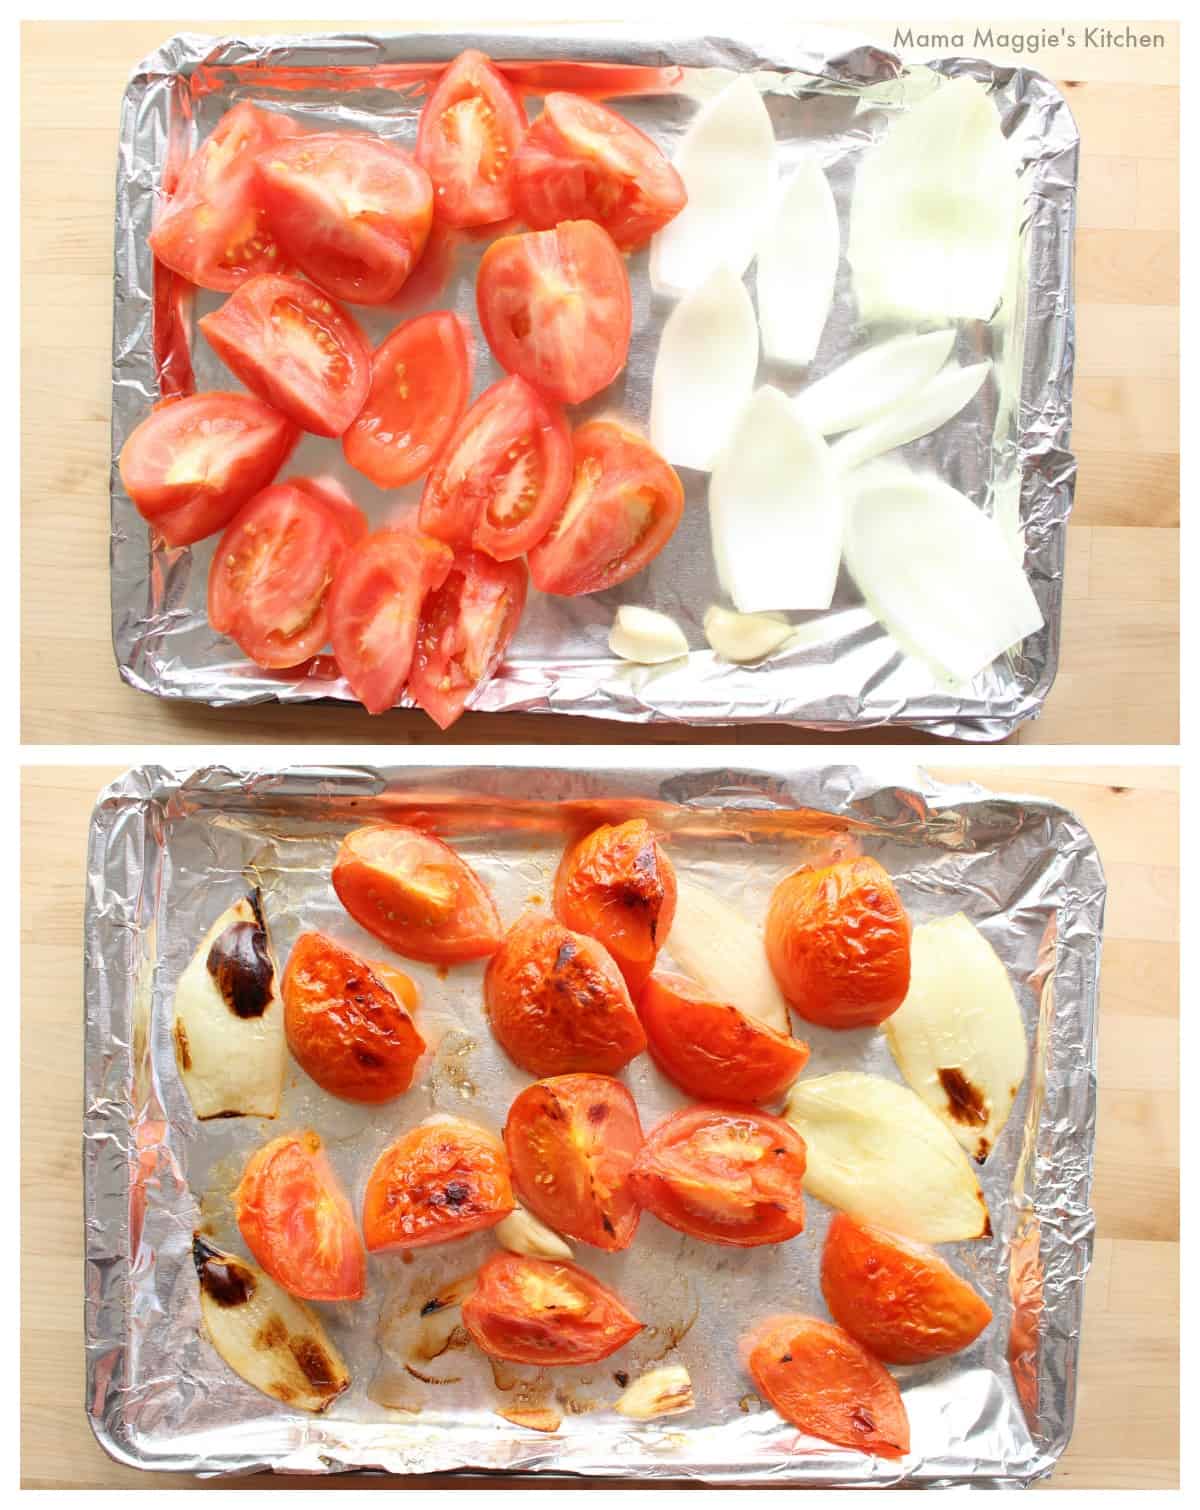 Two pictures of raw and roasted tomatoes, onion, and garlic.